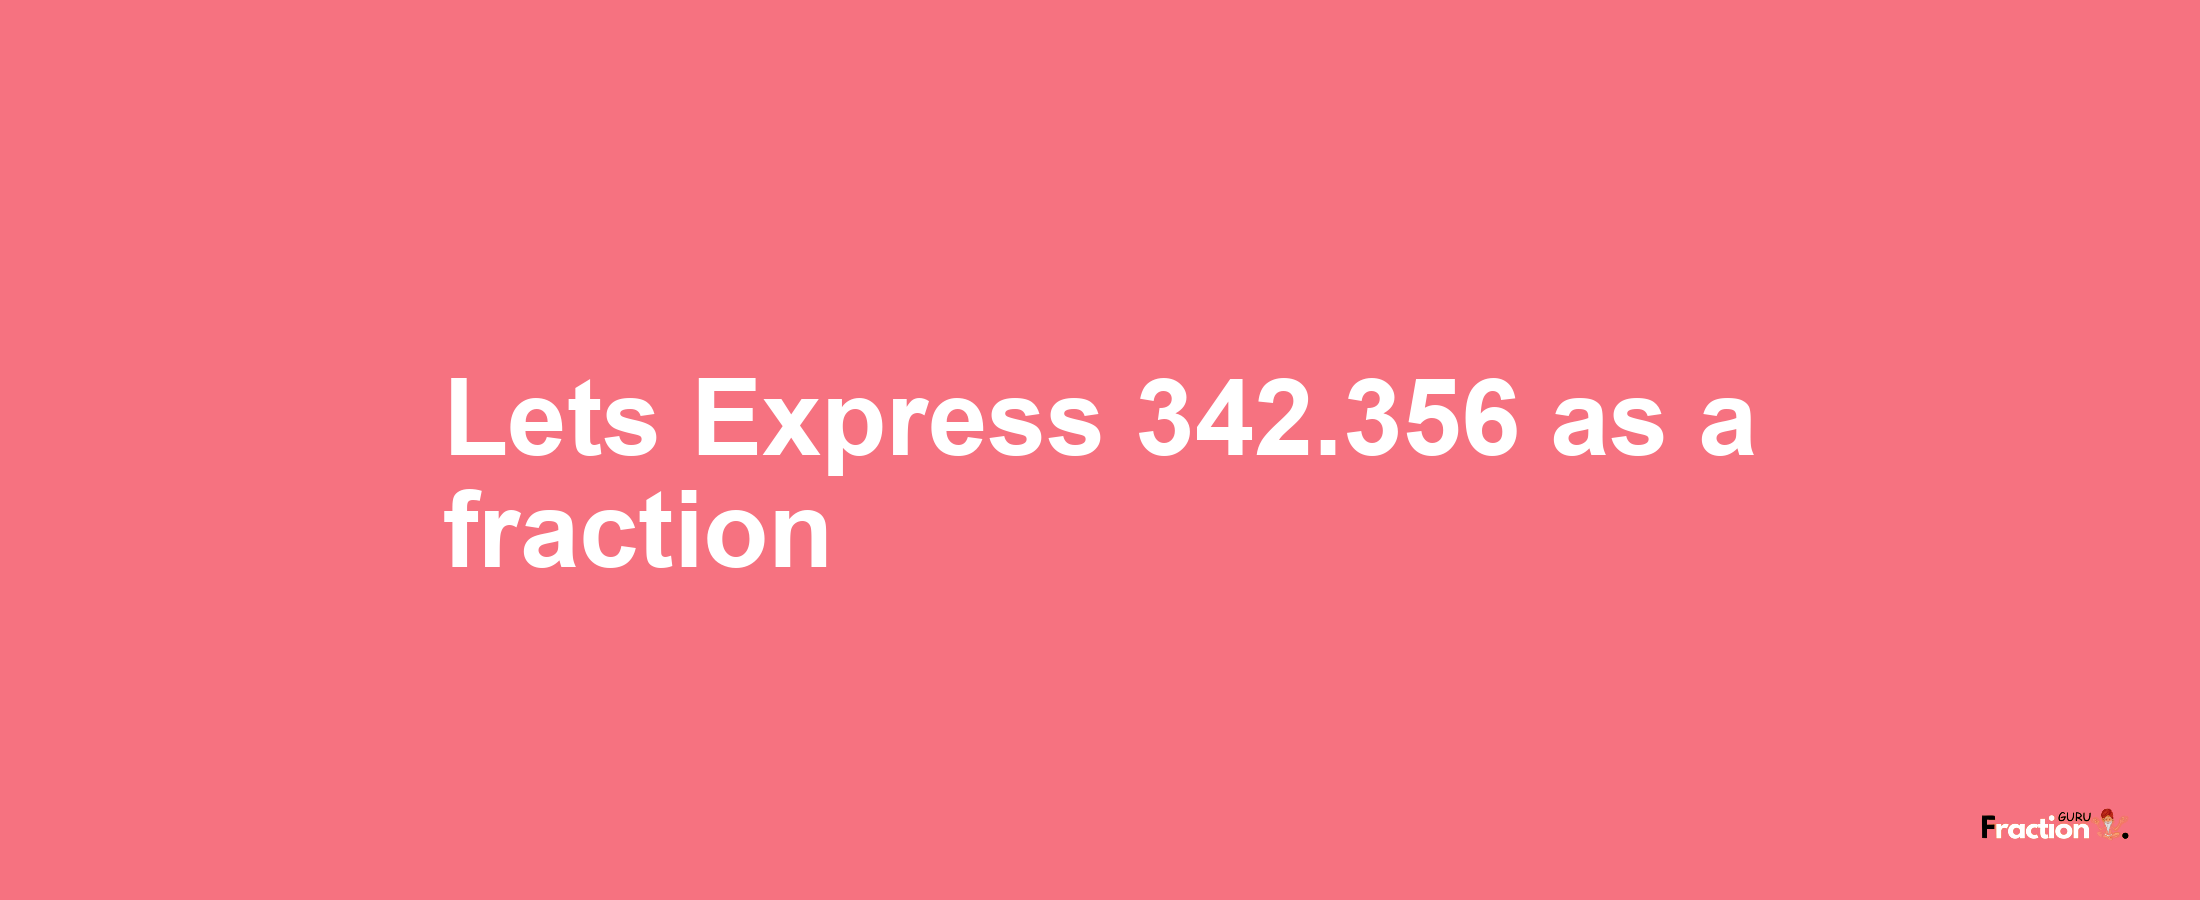 Lets Express 342.356 as afraction